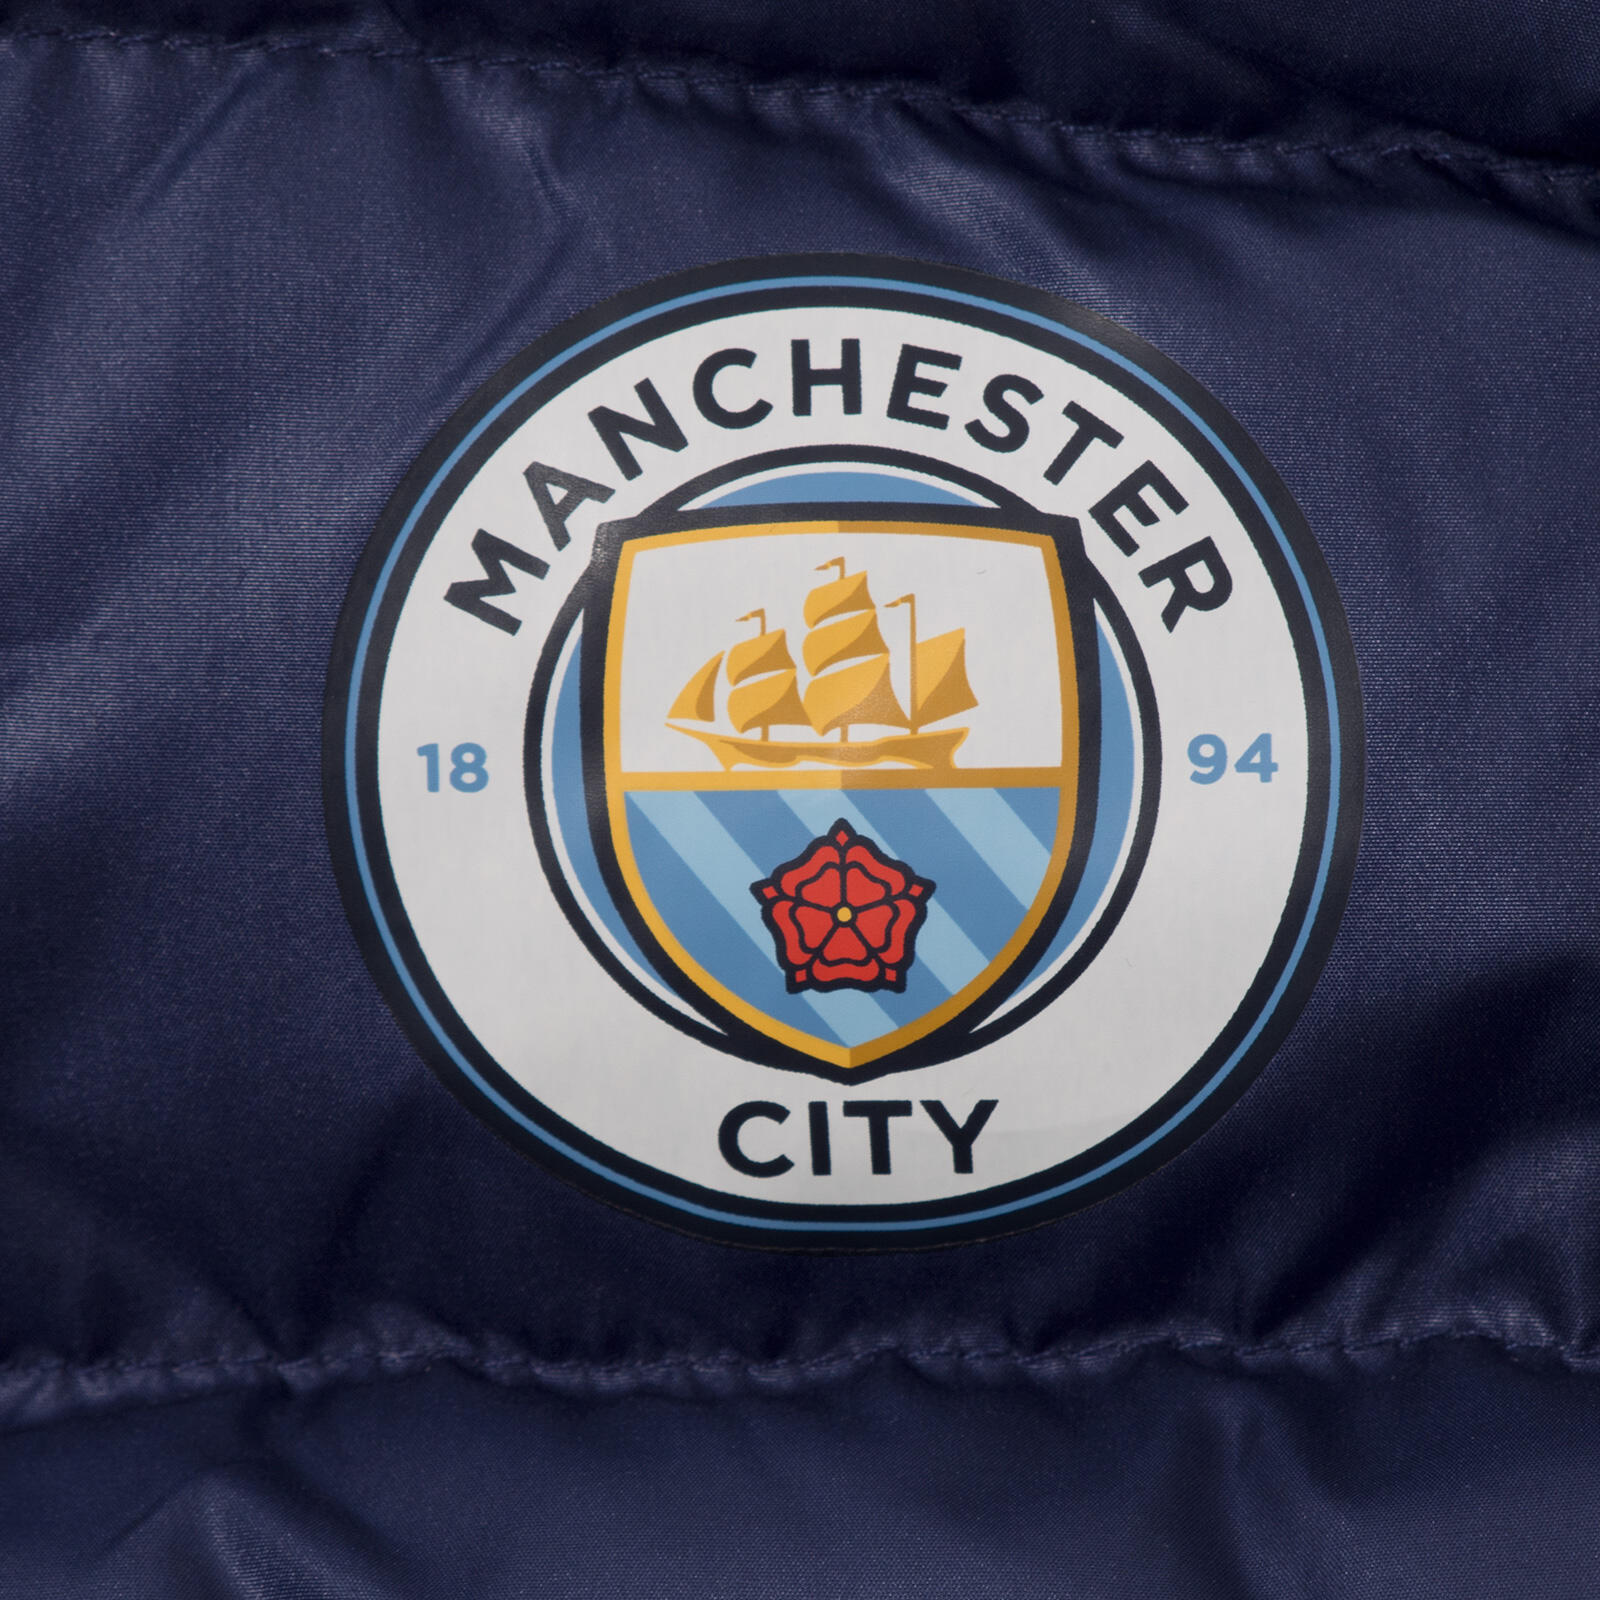 Manchester City Boys Gilet Jacket Body Warmer Padded Kids OFFICIAL Gift 2/4